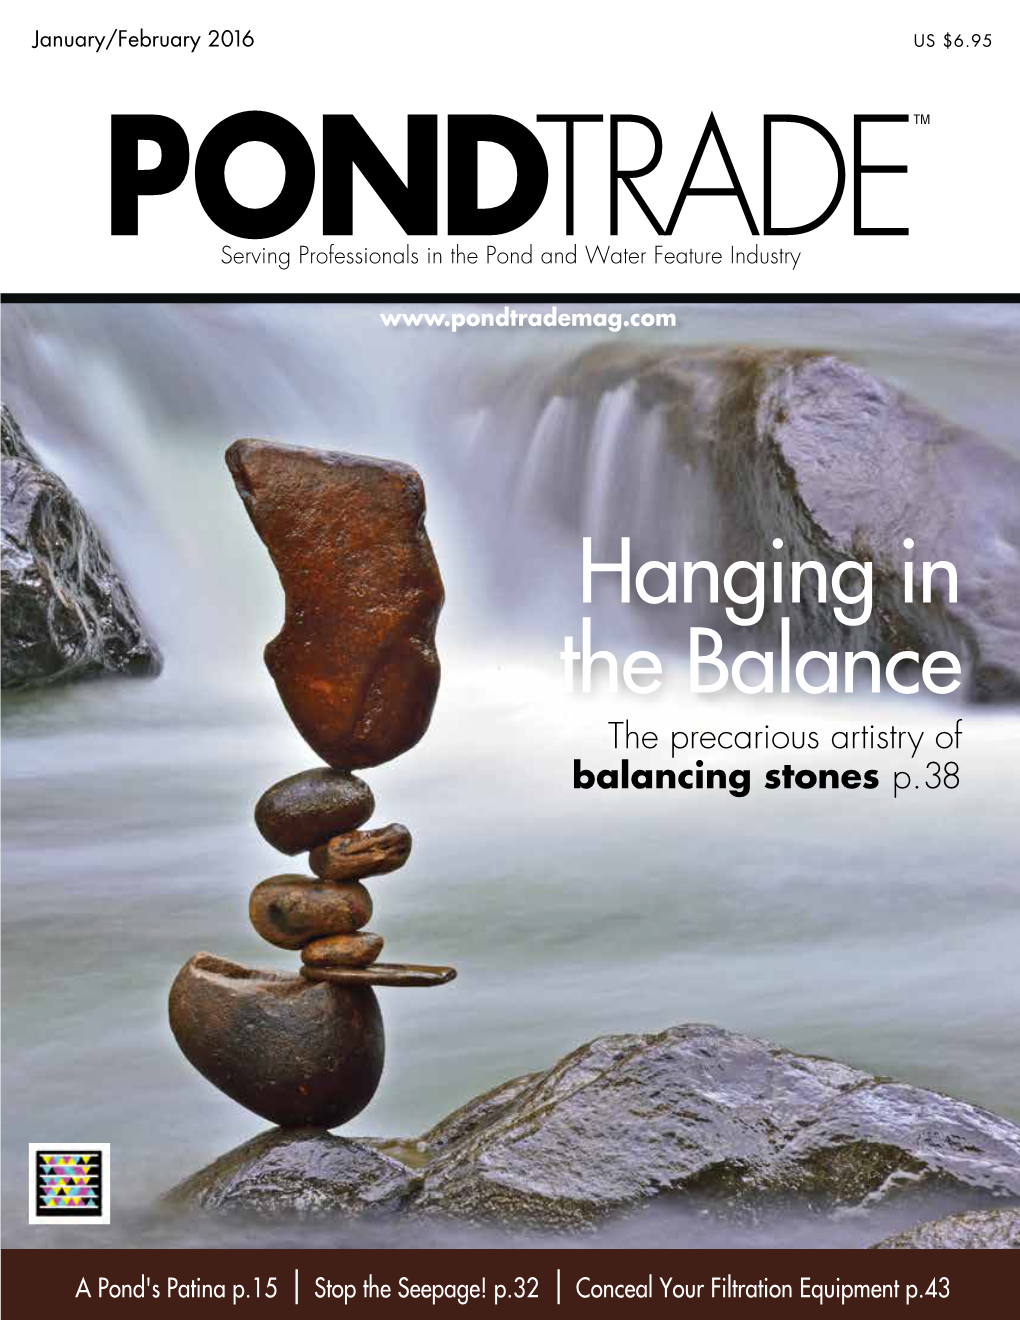 Hanging in the Balance the Precarious Artistry of Balancing Stones P.38